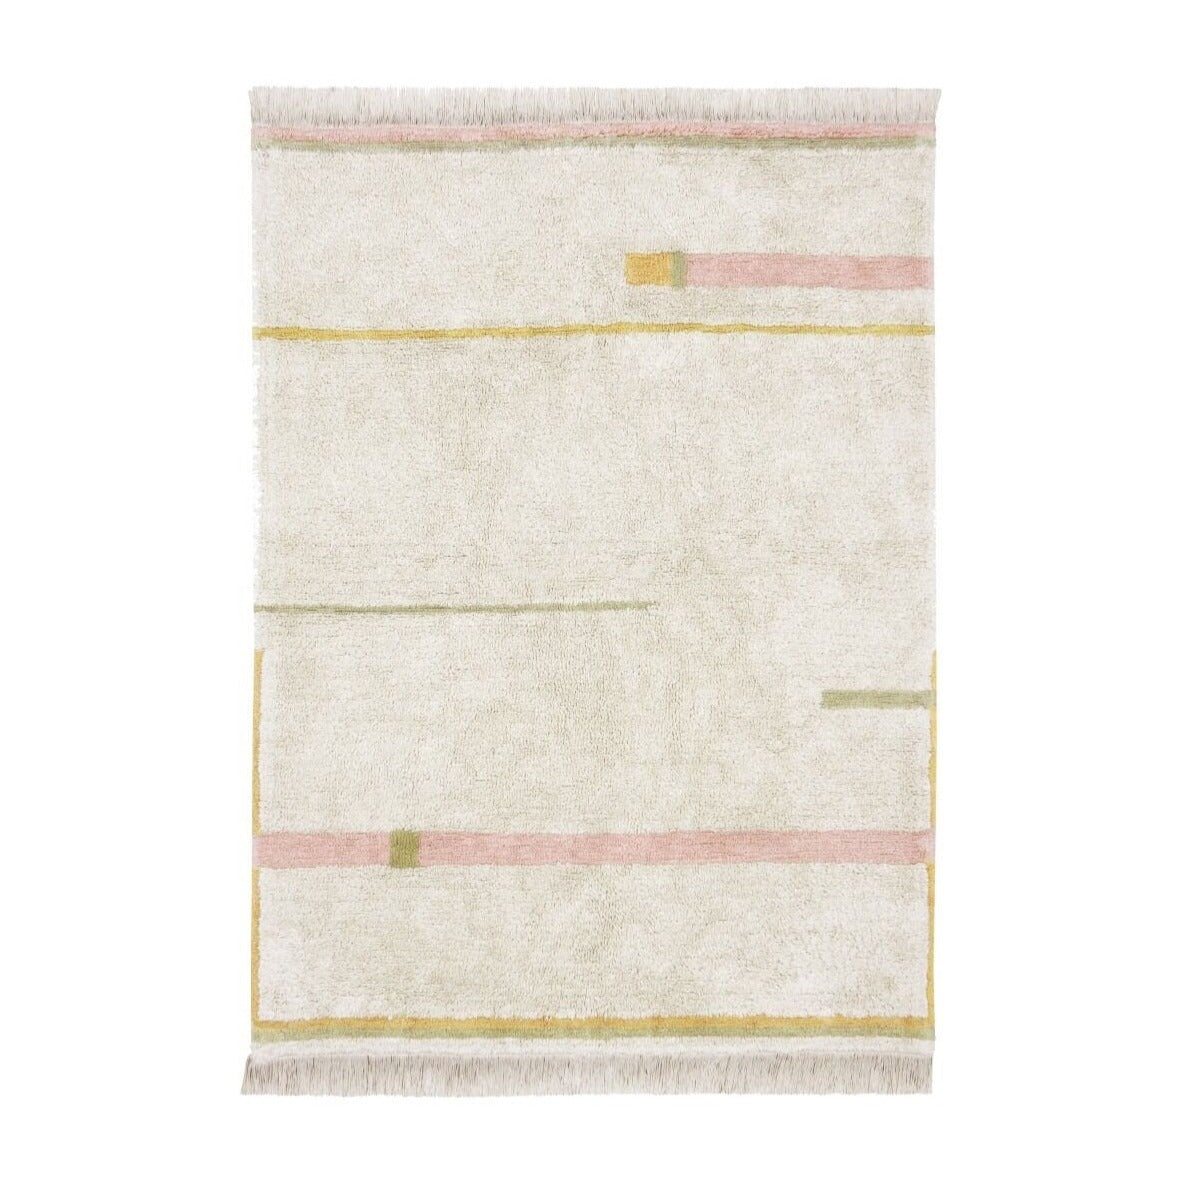 Lorena Canals Washable Rug - Lanes Vintage Nude (2 Sizes Available)